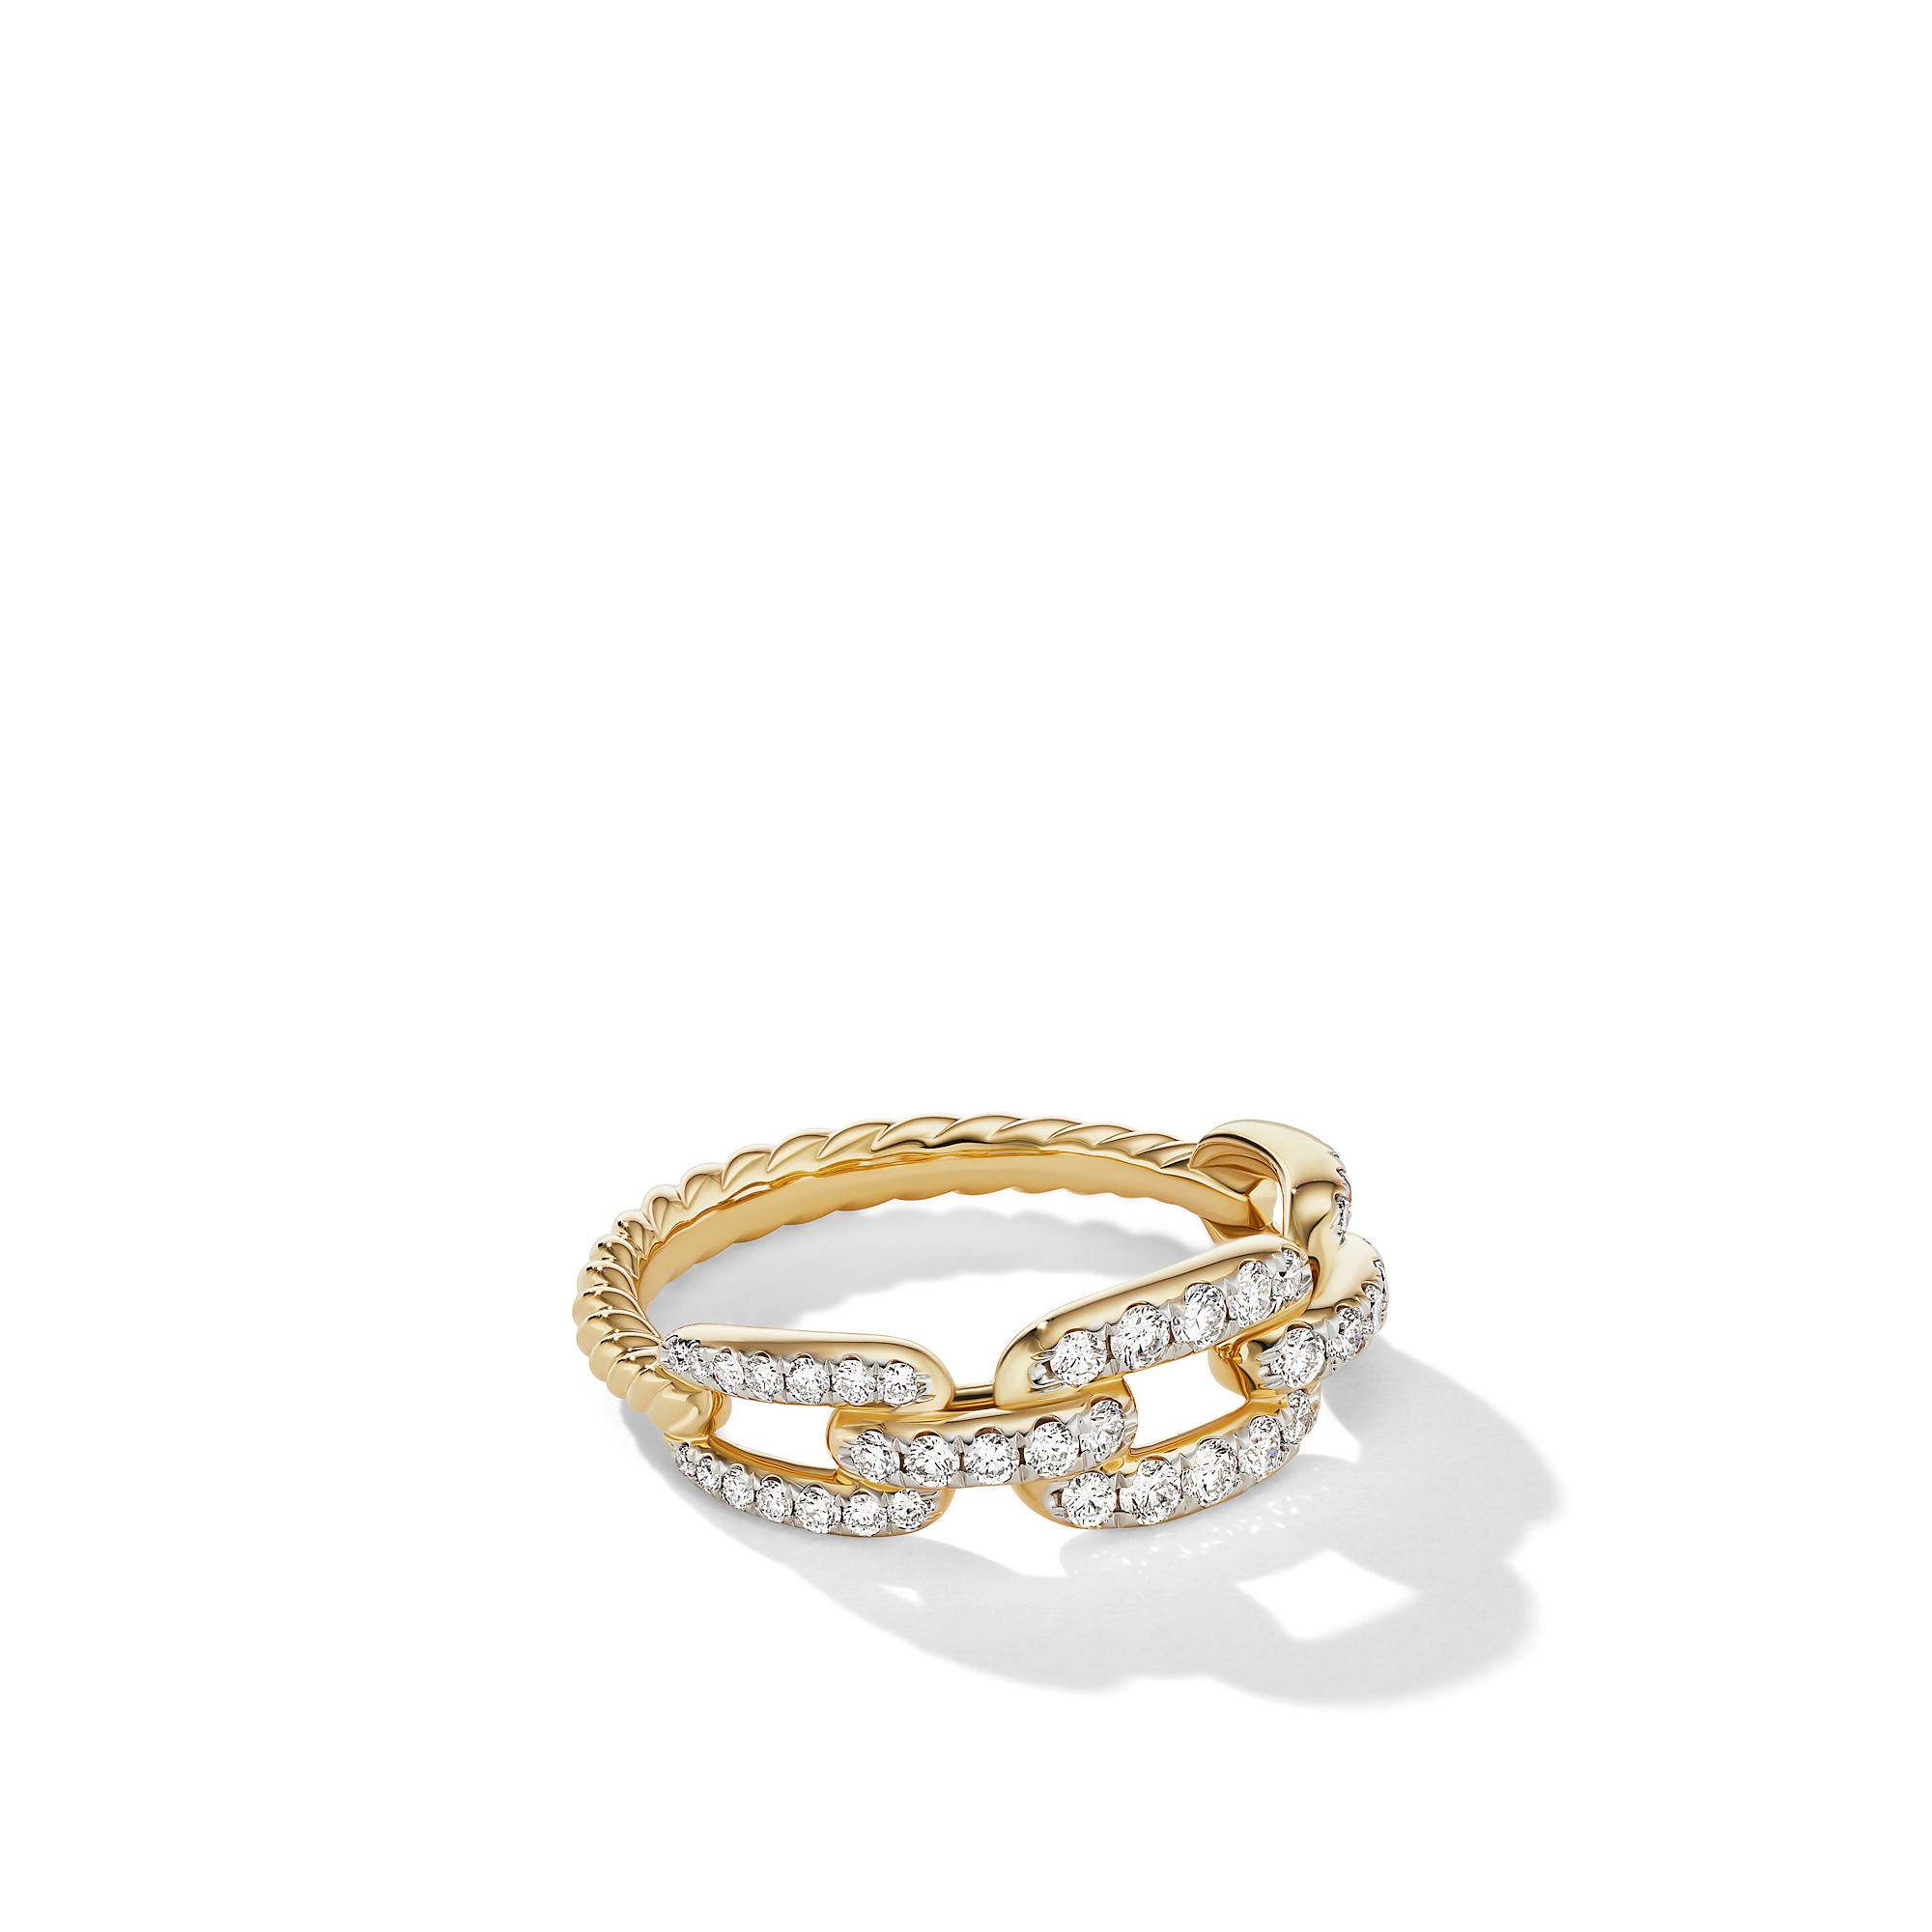 David Yurman Stax Chain Link Ring in 18K Yellow Gold with Pave Diamonds and Emerald 1